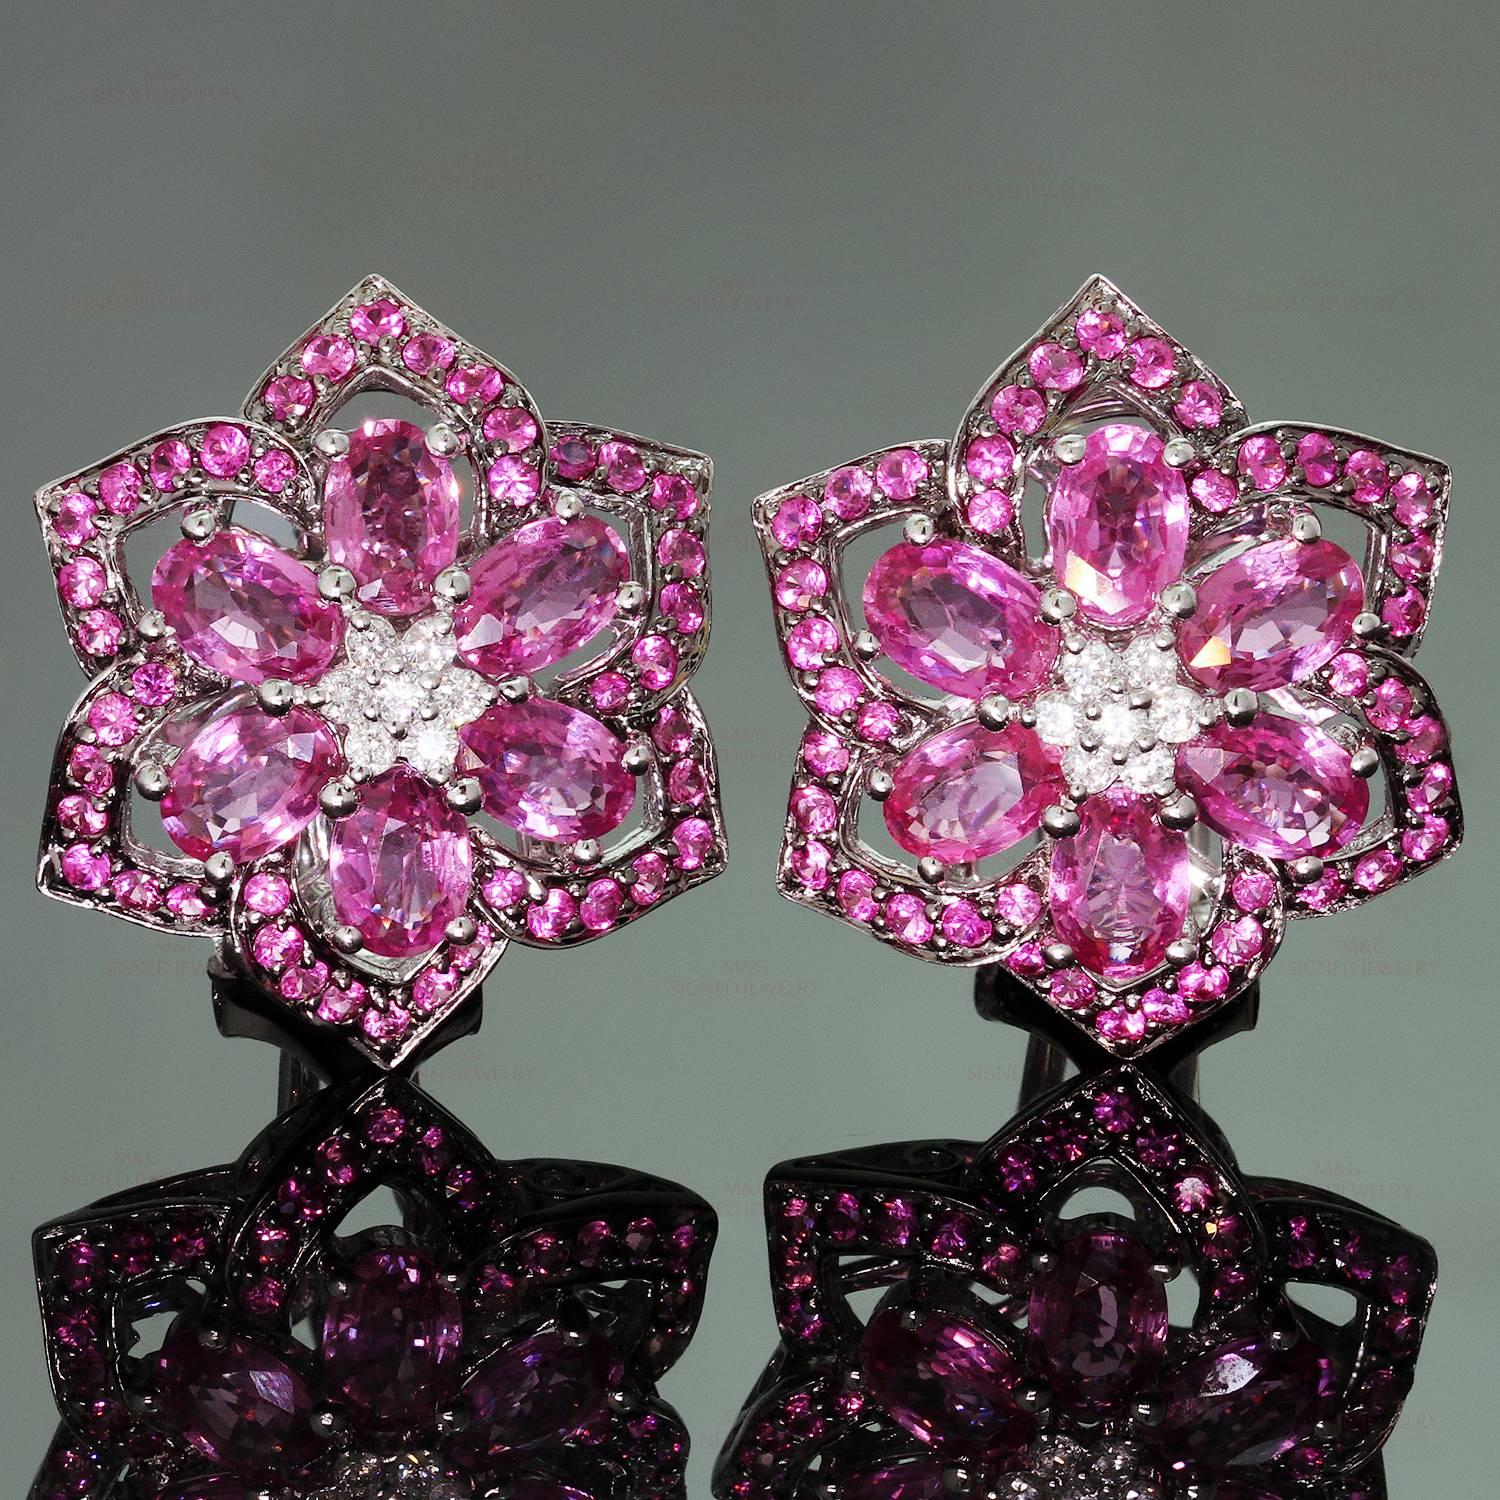 These gorgeous flower earrings are crafted in 18k white gold and set with faceted pink sapphires of an estimated 8.20 carats and brilliant-cut round diamonds of an estimated 0.30 carats. Made in United States circa 2010s. Measurements: 0.90"